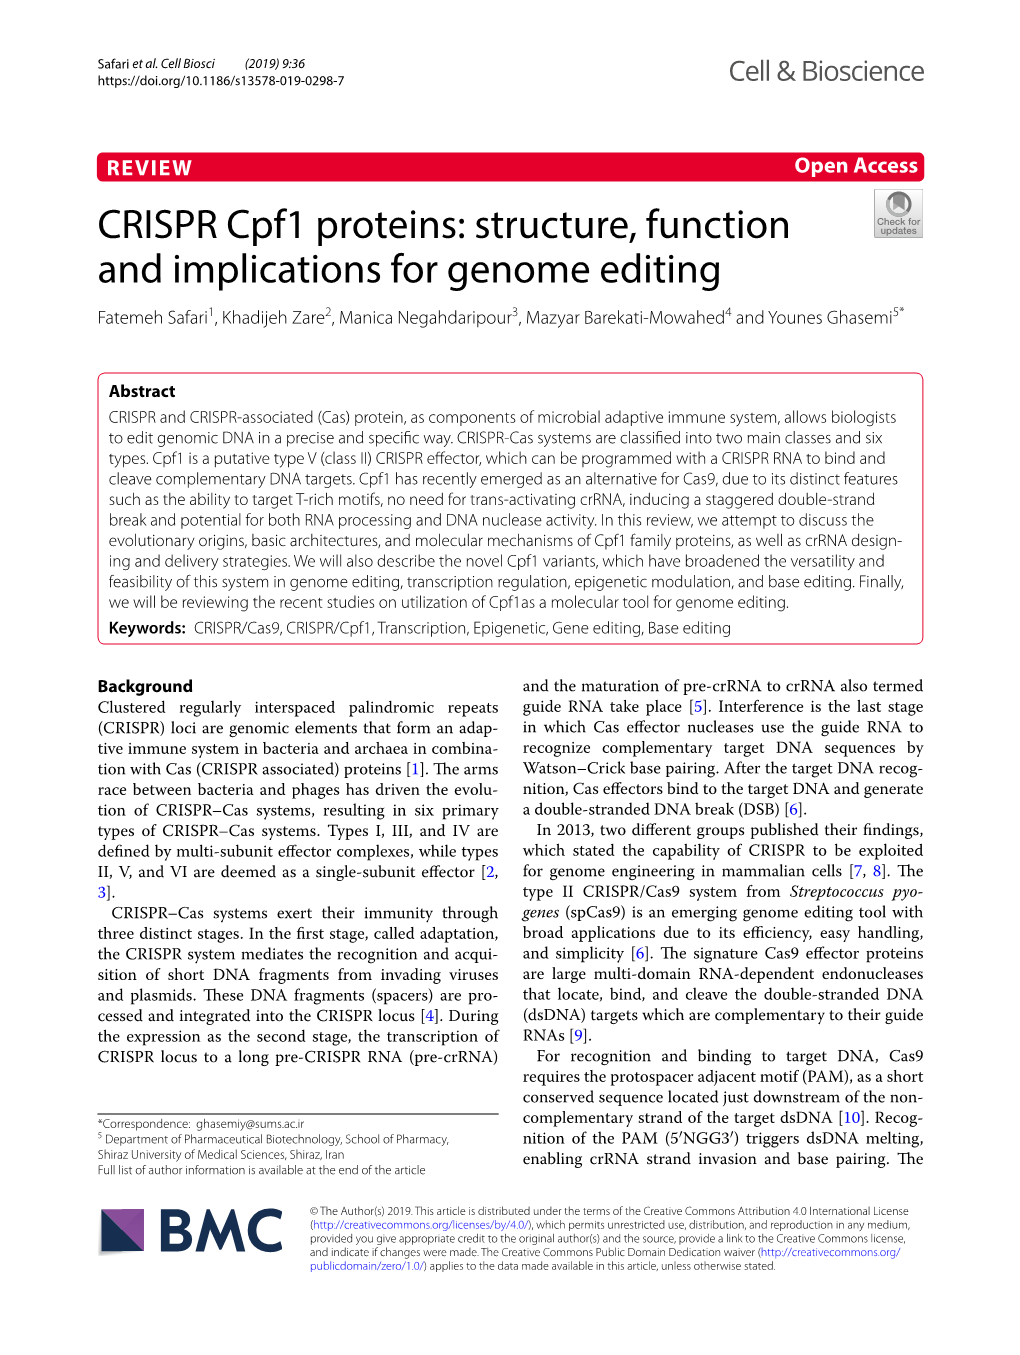 CRISPR Cpf1 Proteins: Structure, Function and Implications For